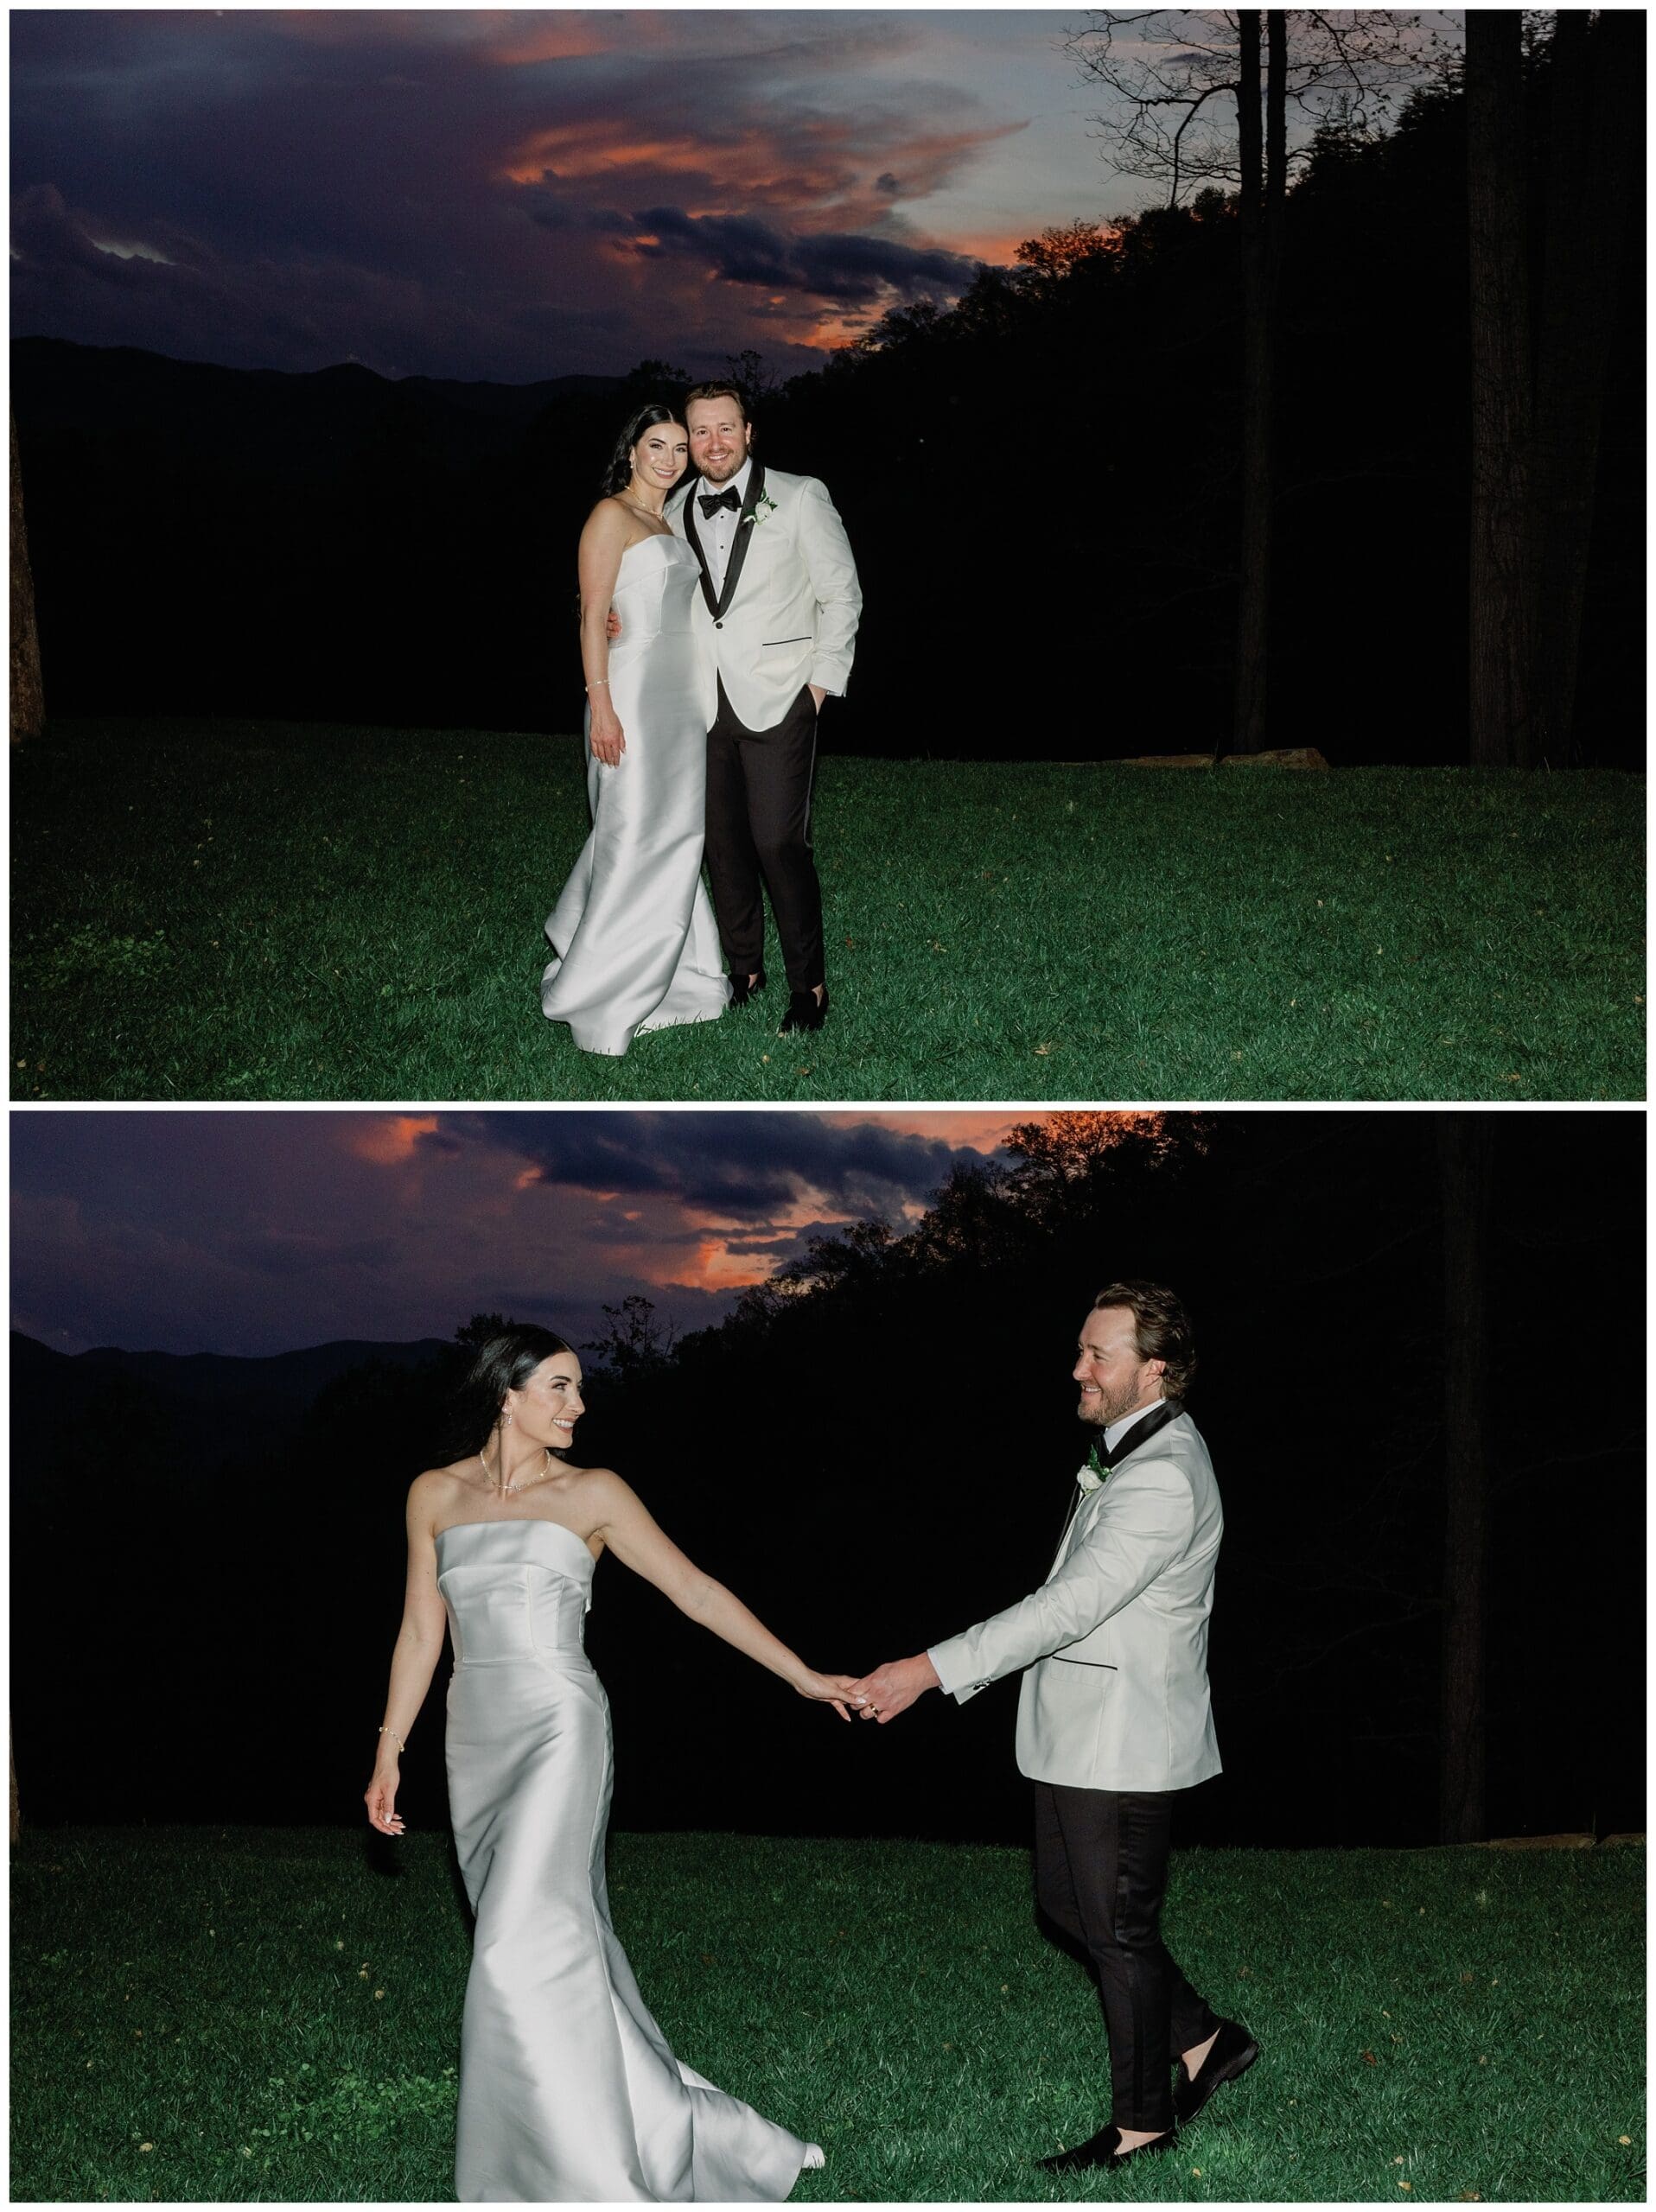 A bride in a white satin dress and a groom in a light gray suit stand holding hands outdoors at dusk, with a vibrant sunset and mountains in the background.